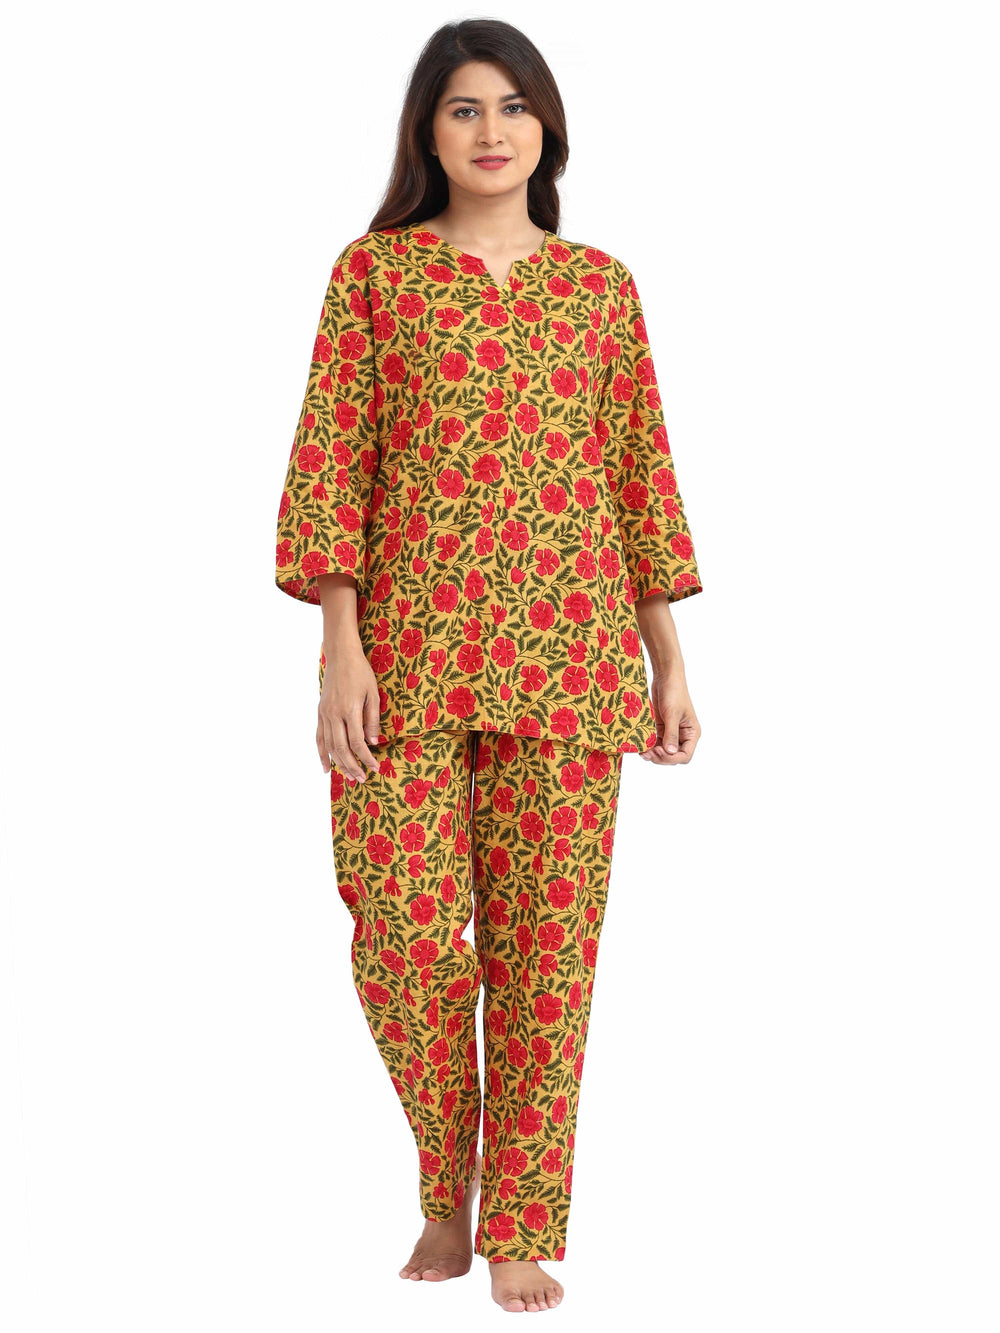  Co-ord sets  Buy Yellow and Pink stylish co ords online at great price- 9shines label 